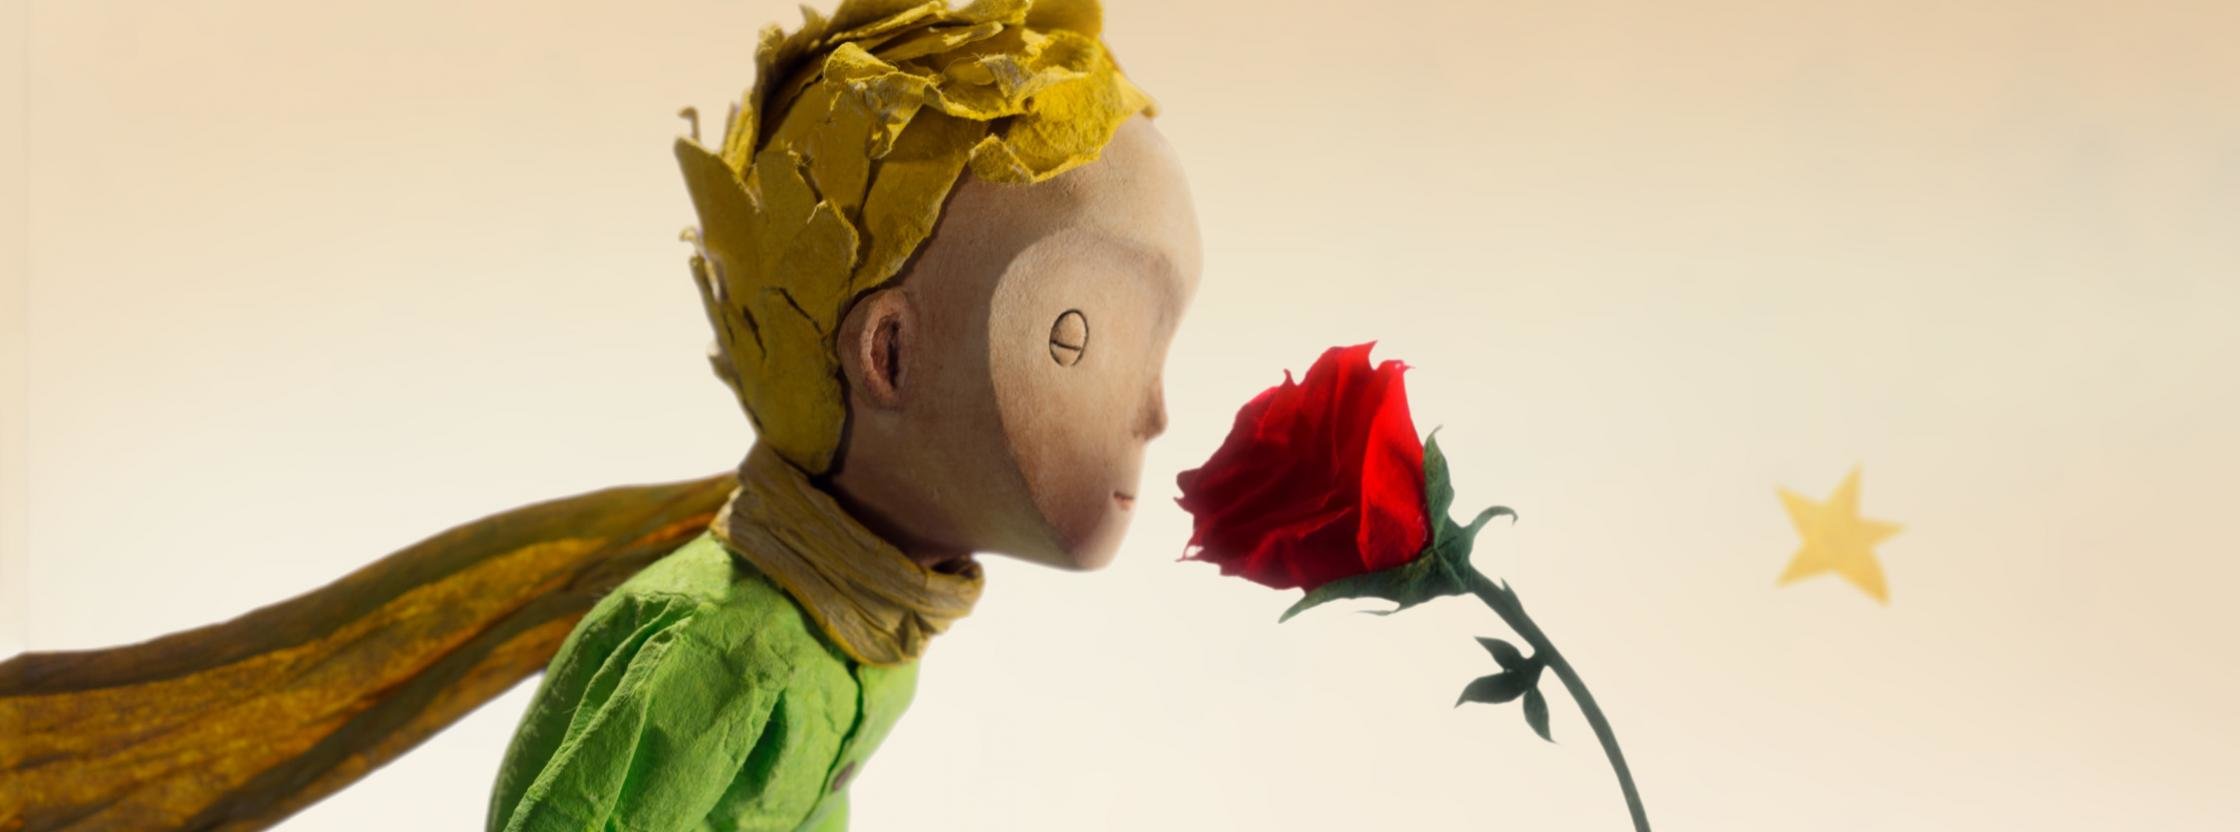 Download dual screen 2240x832 The Little Prince computer wallpaper ID:9395 for free